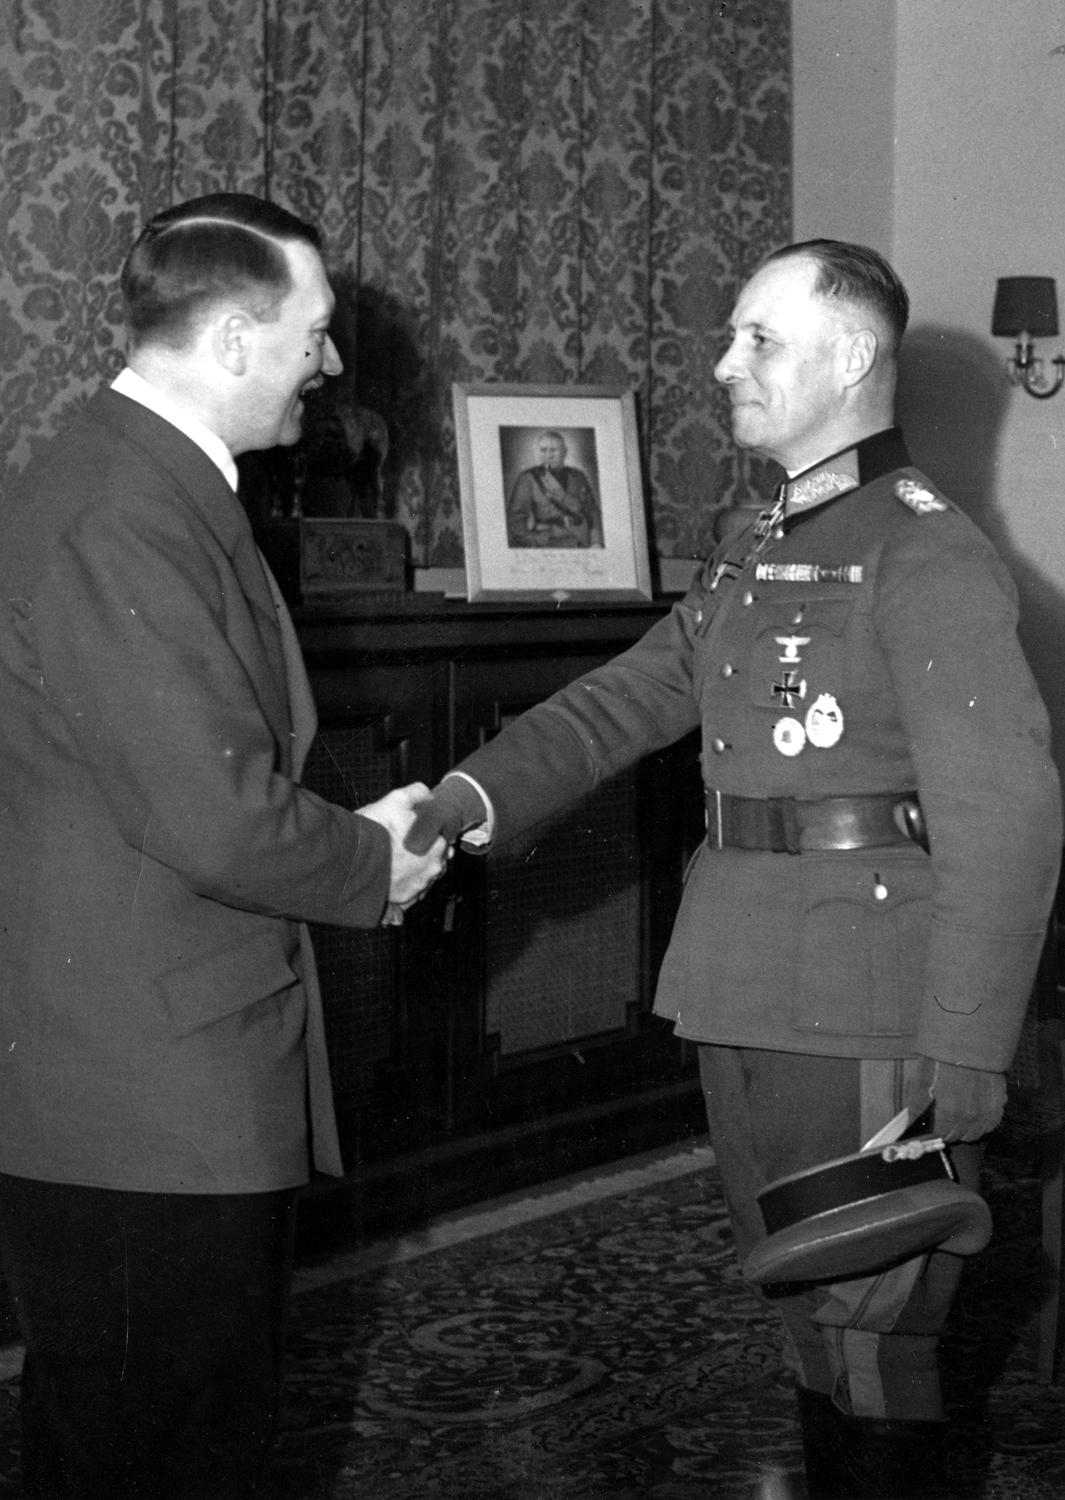 Adolf Hitler awards Erwin Rommel with the Knight's Cross of the Iron Cross